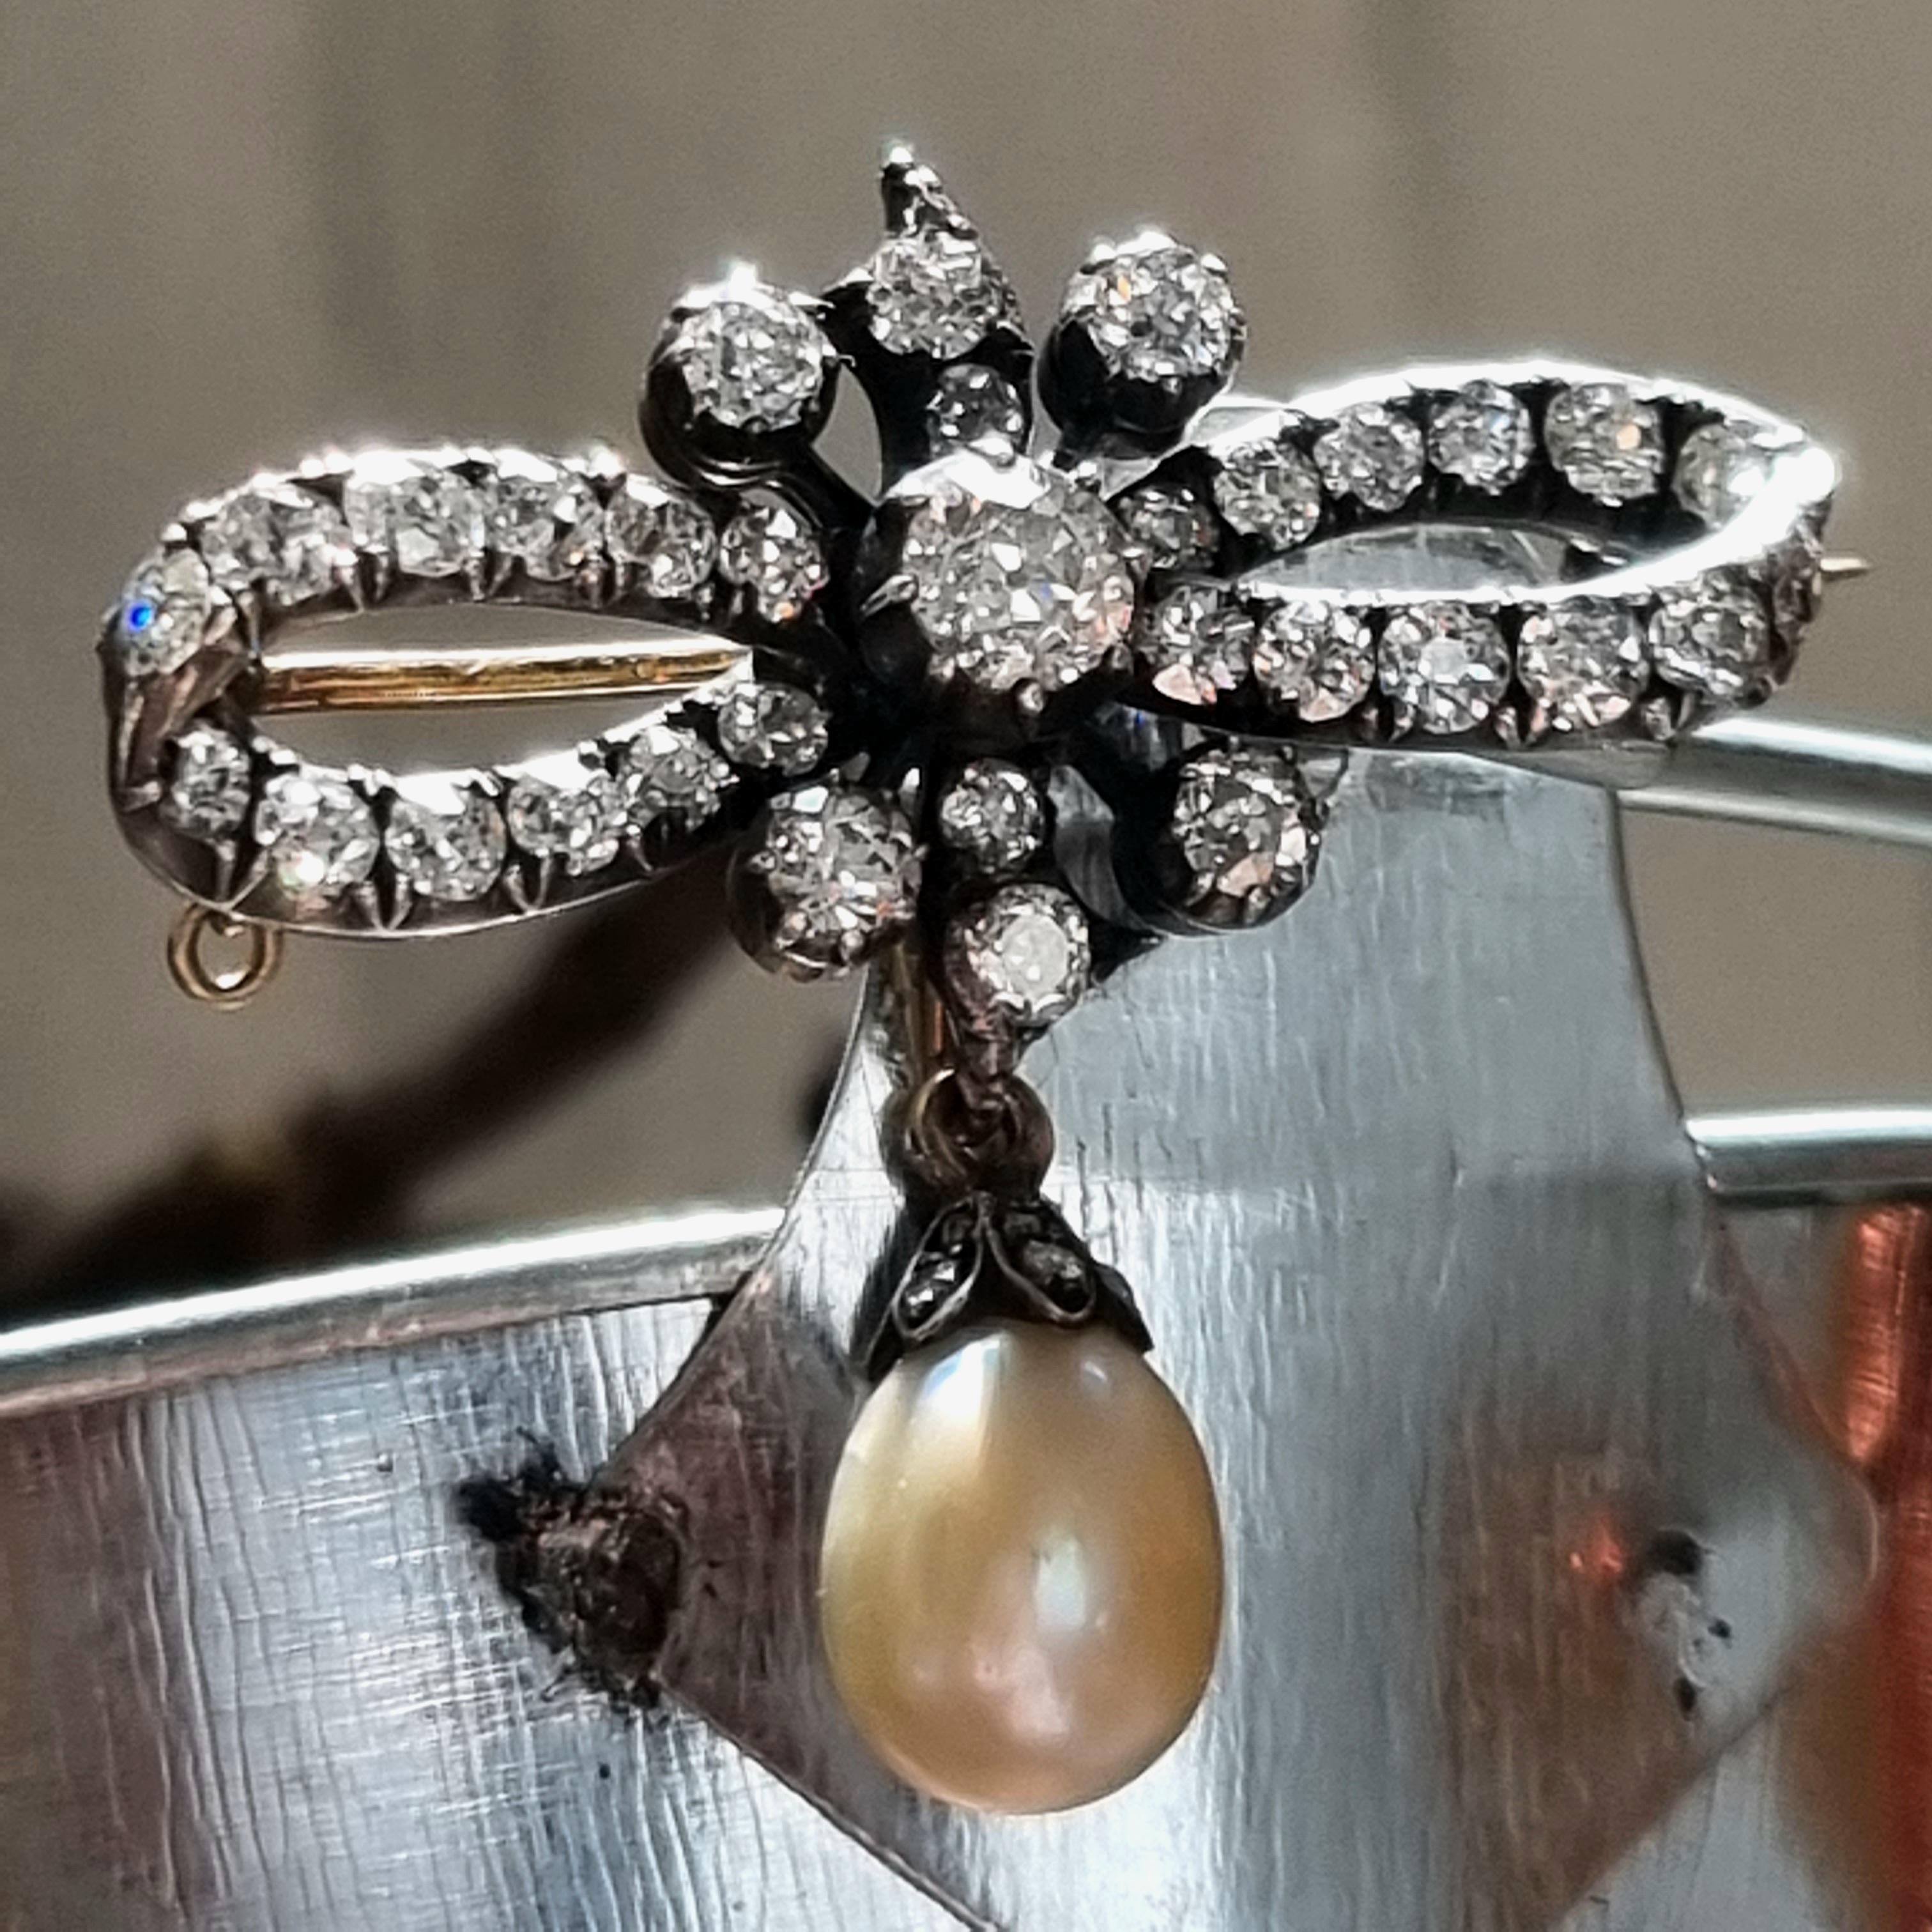 VICTORIAN NATURAL SALTWATER PEARL AND DIAMOND BOW BROOCH (late 19th Century) (GIA Lab report and Gem & Pearl Lab report)
Certified Natural Saltwater Pearl and Diamond Brooch 19th Century.
Suspending a Natural Saltwater pear-shaped Pearl, measuring